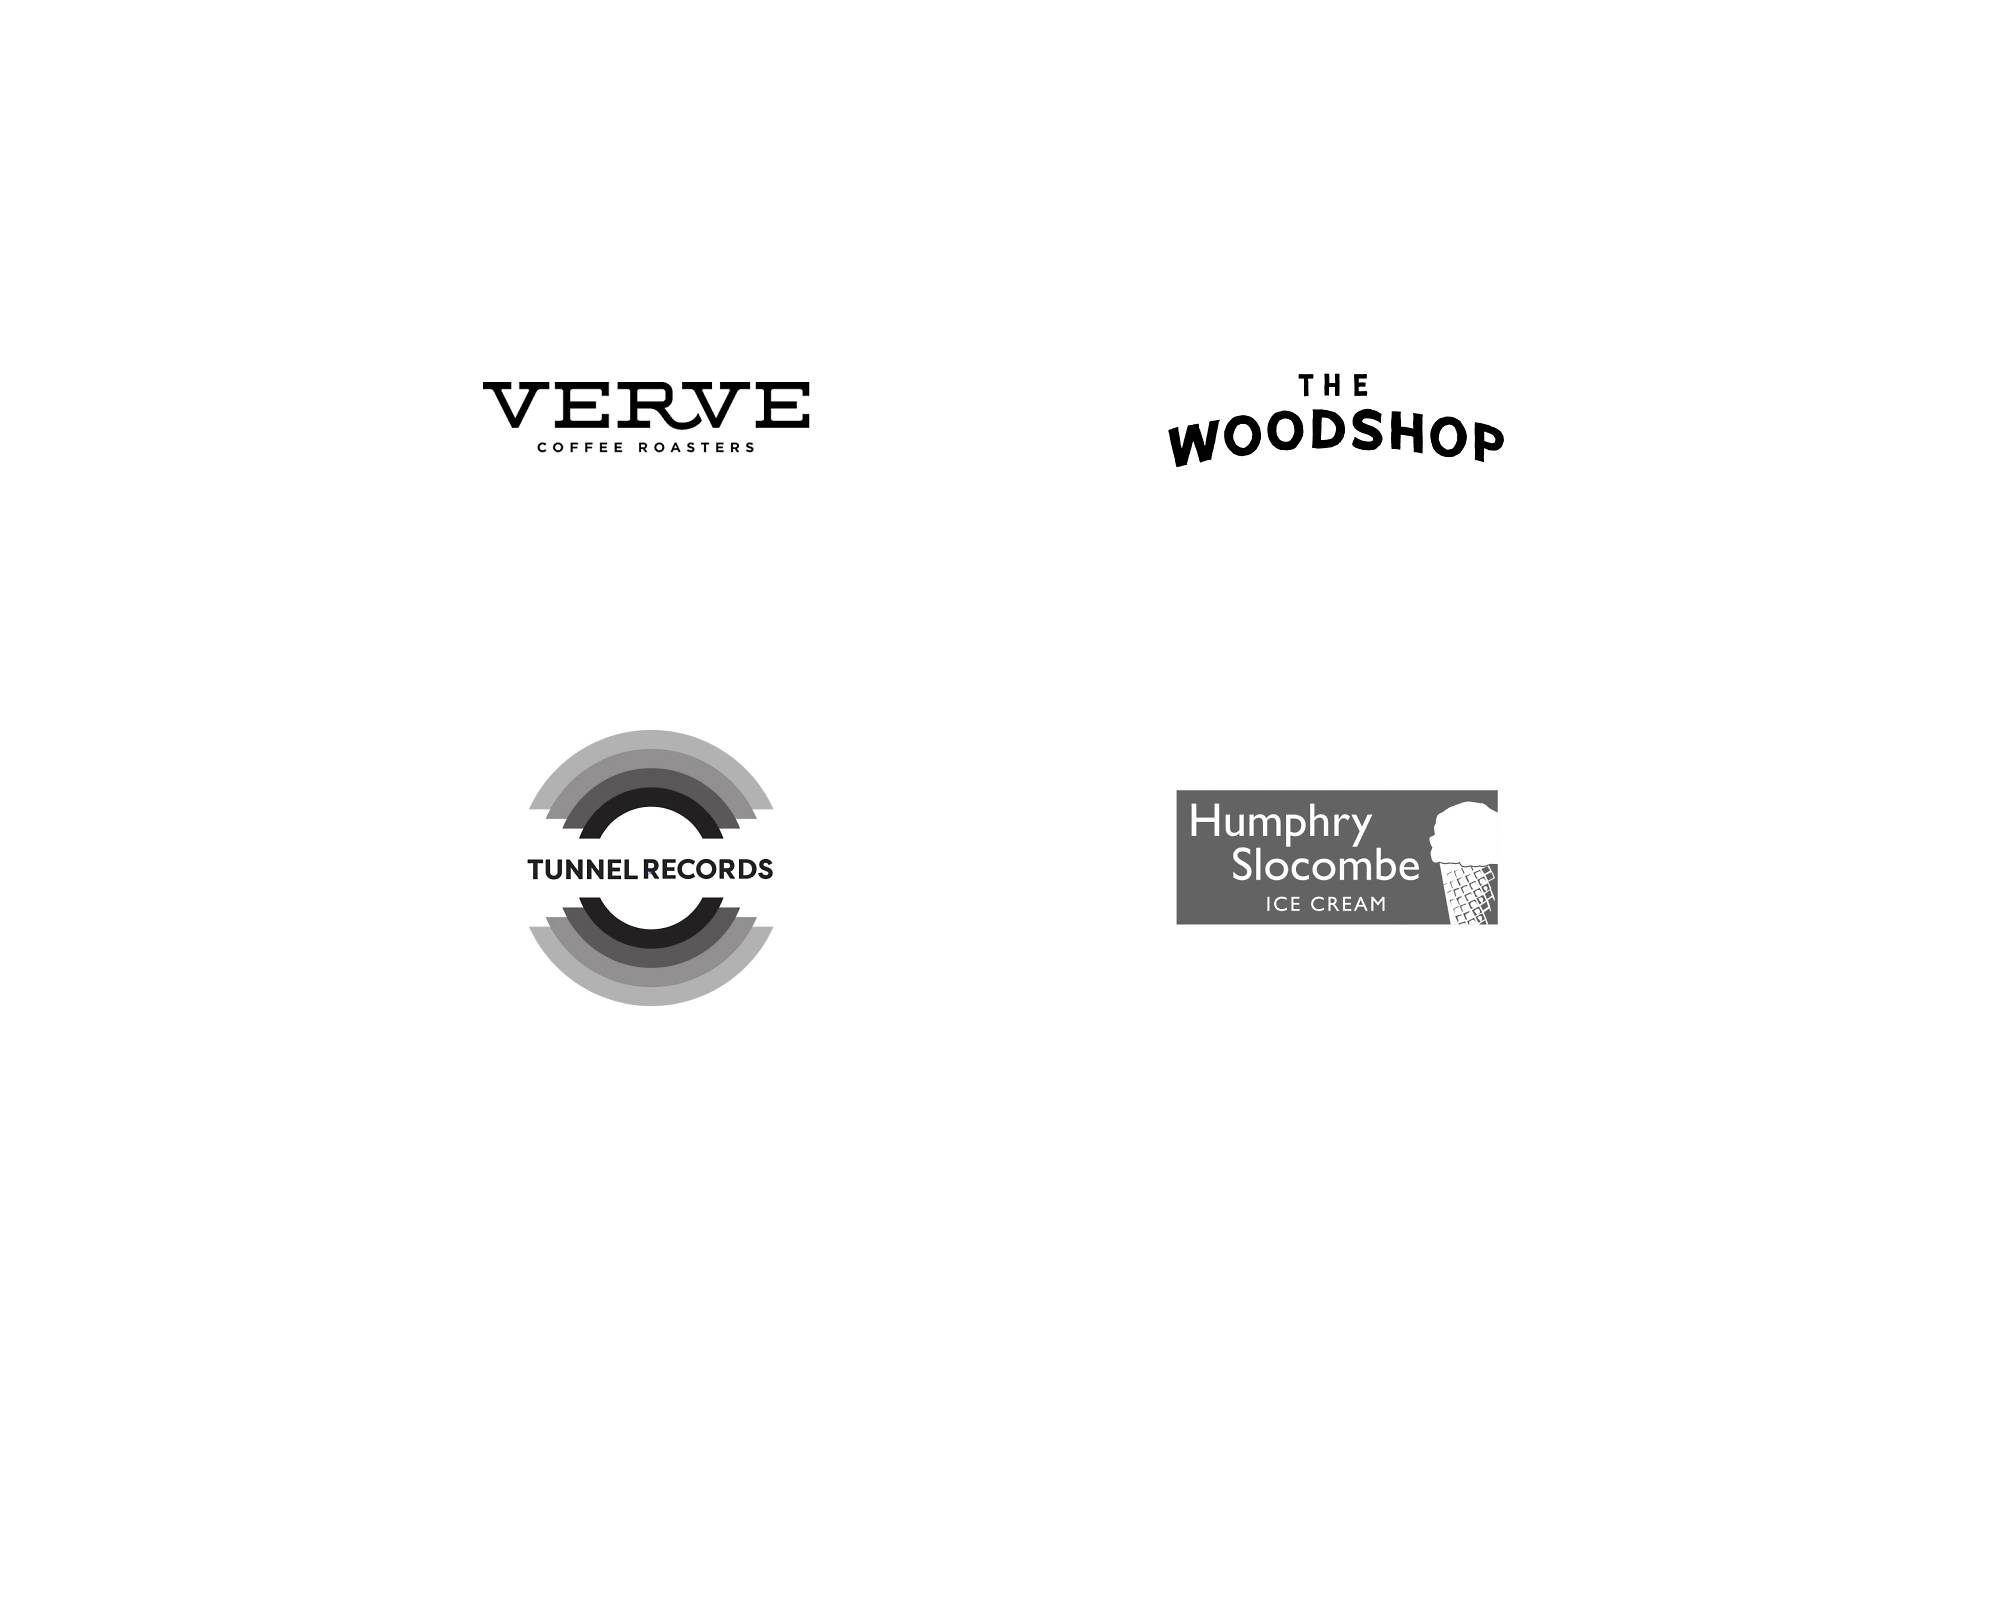 Logos of our Marketplace partners: Verve Coffee, The Woodshop, Tunnel Records, and Humphry Slocombe Ice Cream.